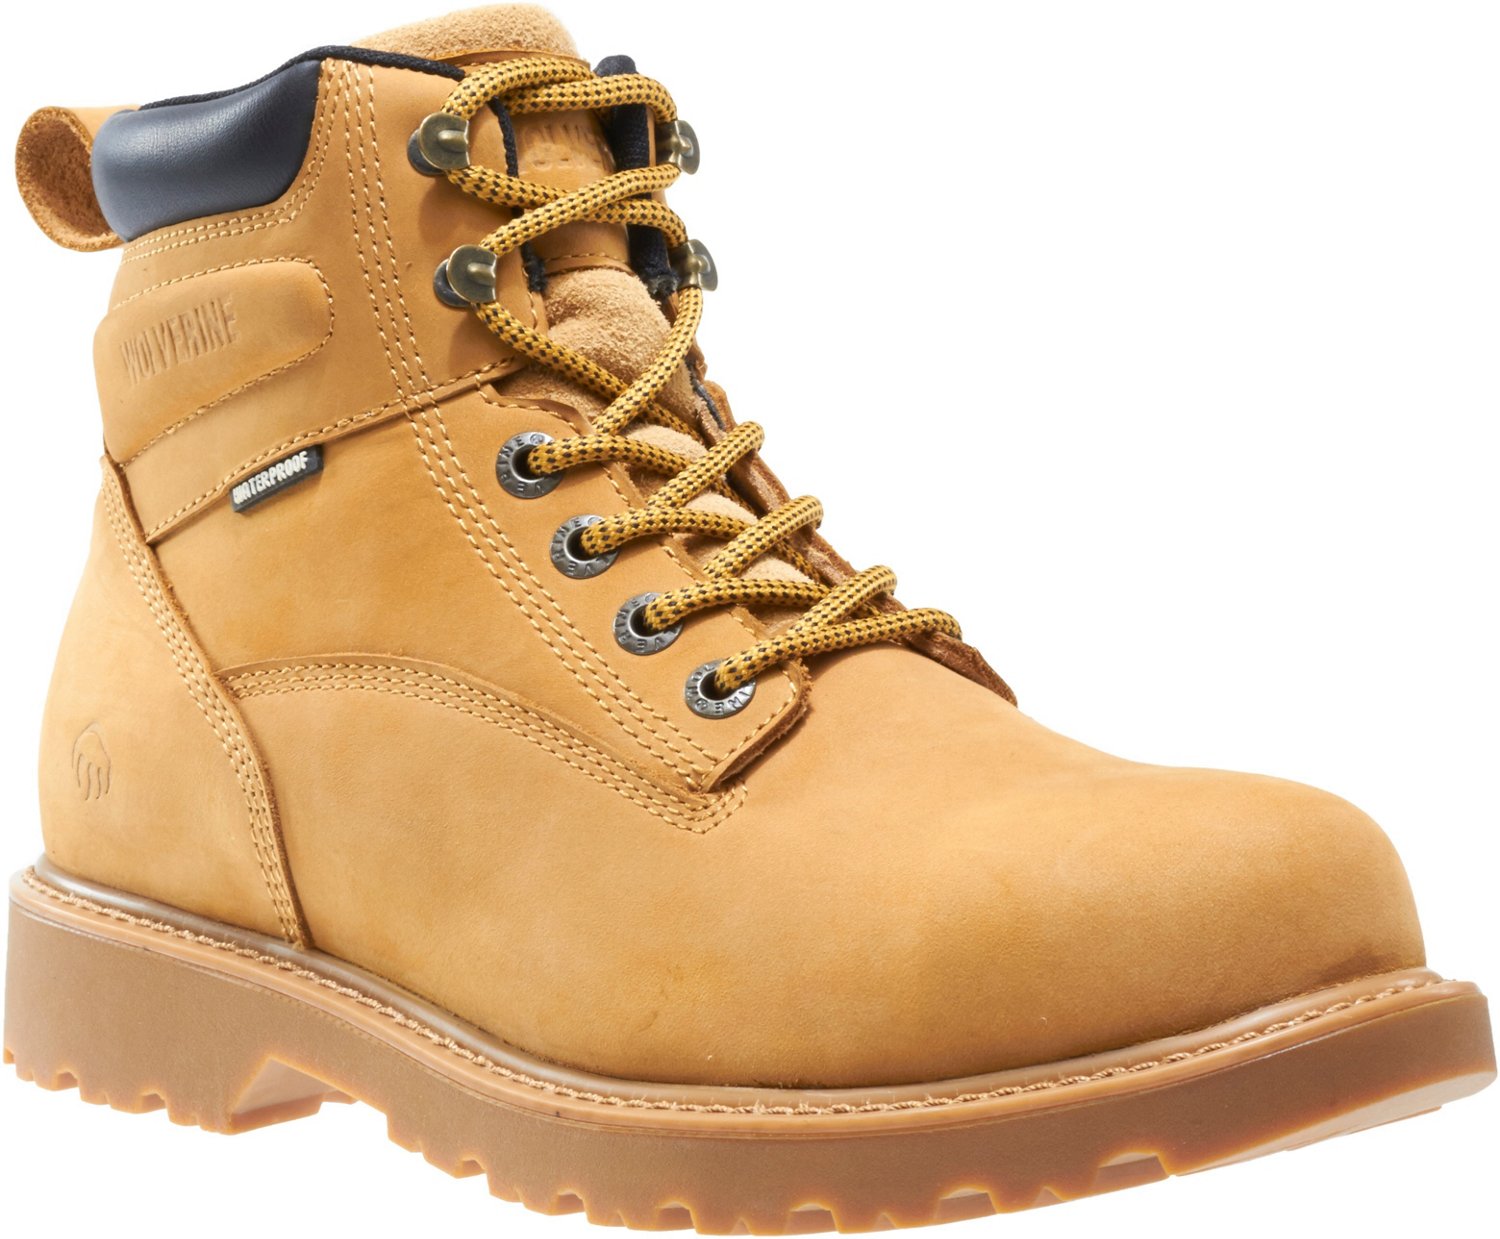 Wolverine Men's Floorhand 8 in EH Composite Toe Lace Up Work Boots ...